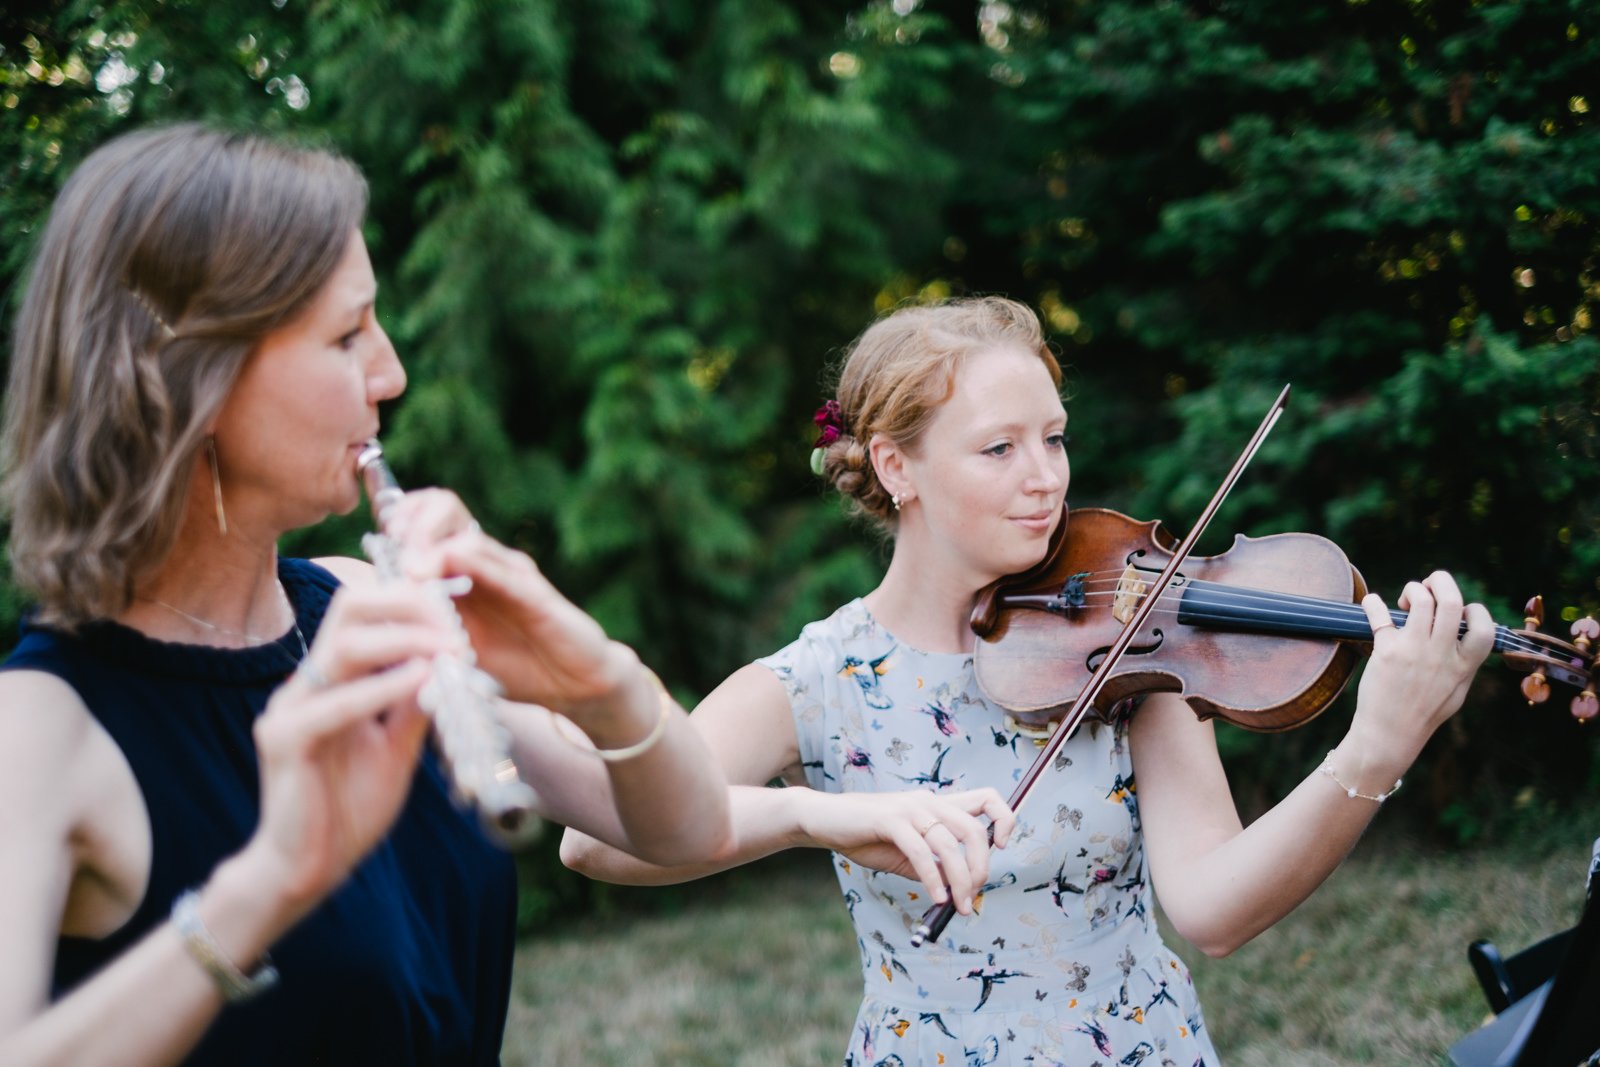  Violinist and flute player play in shade for wedding ceremony 